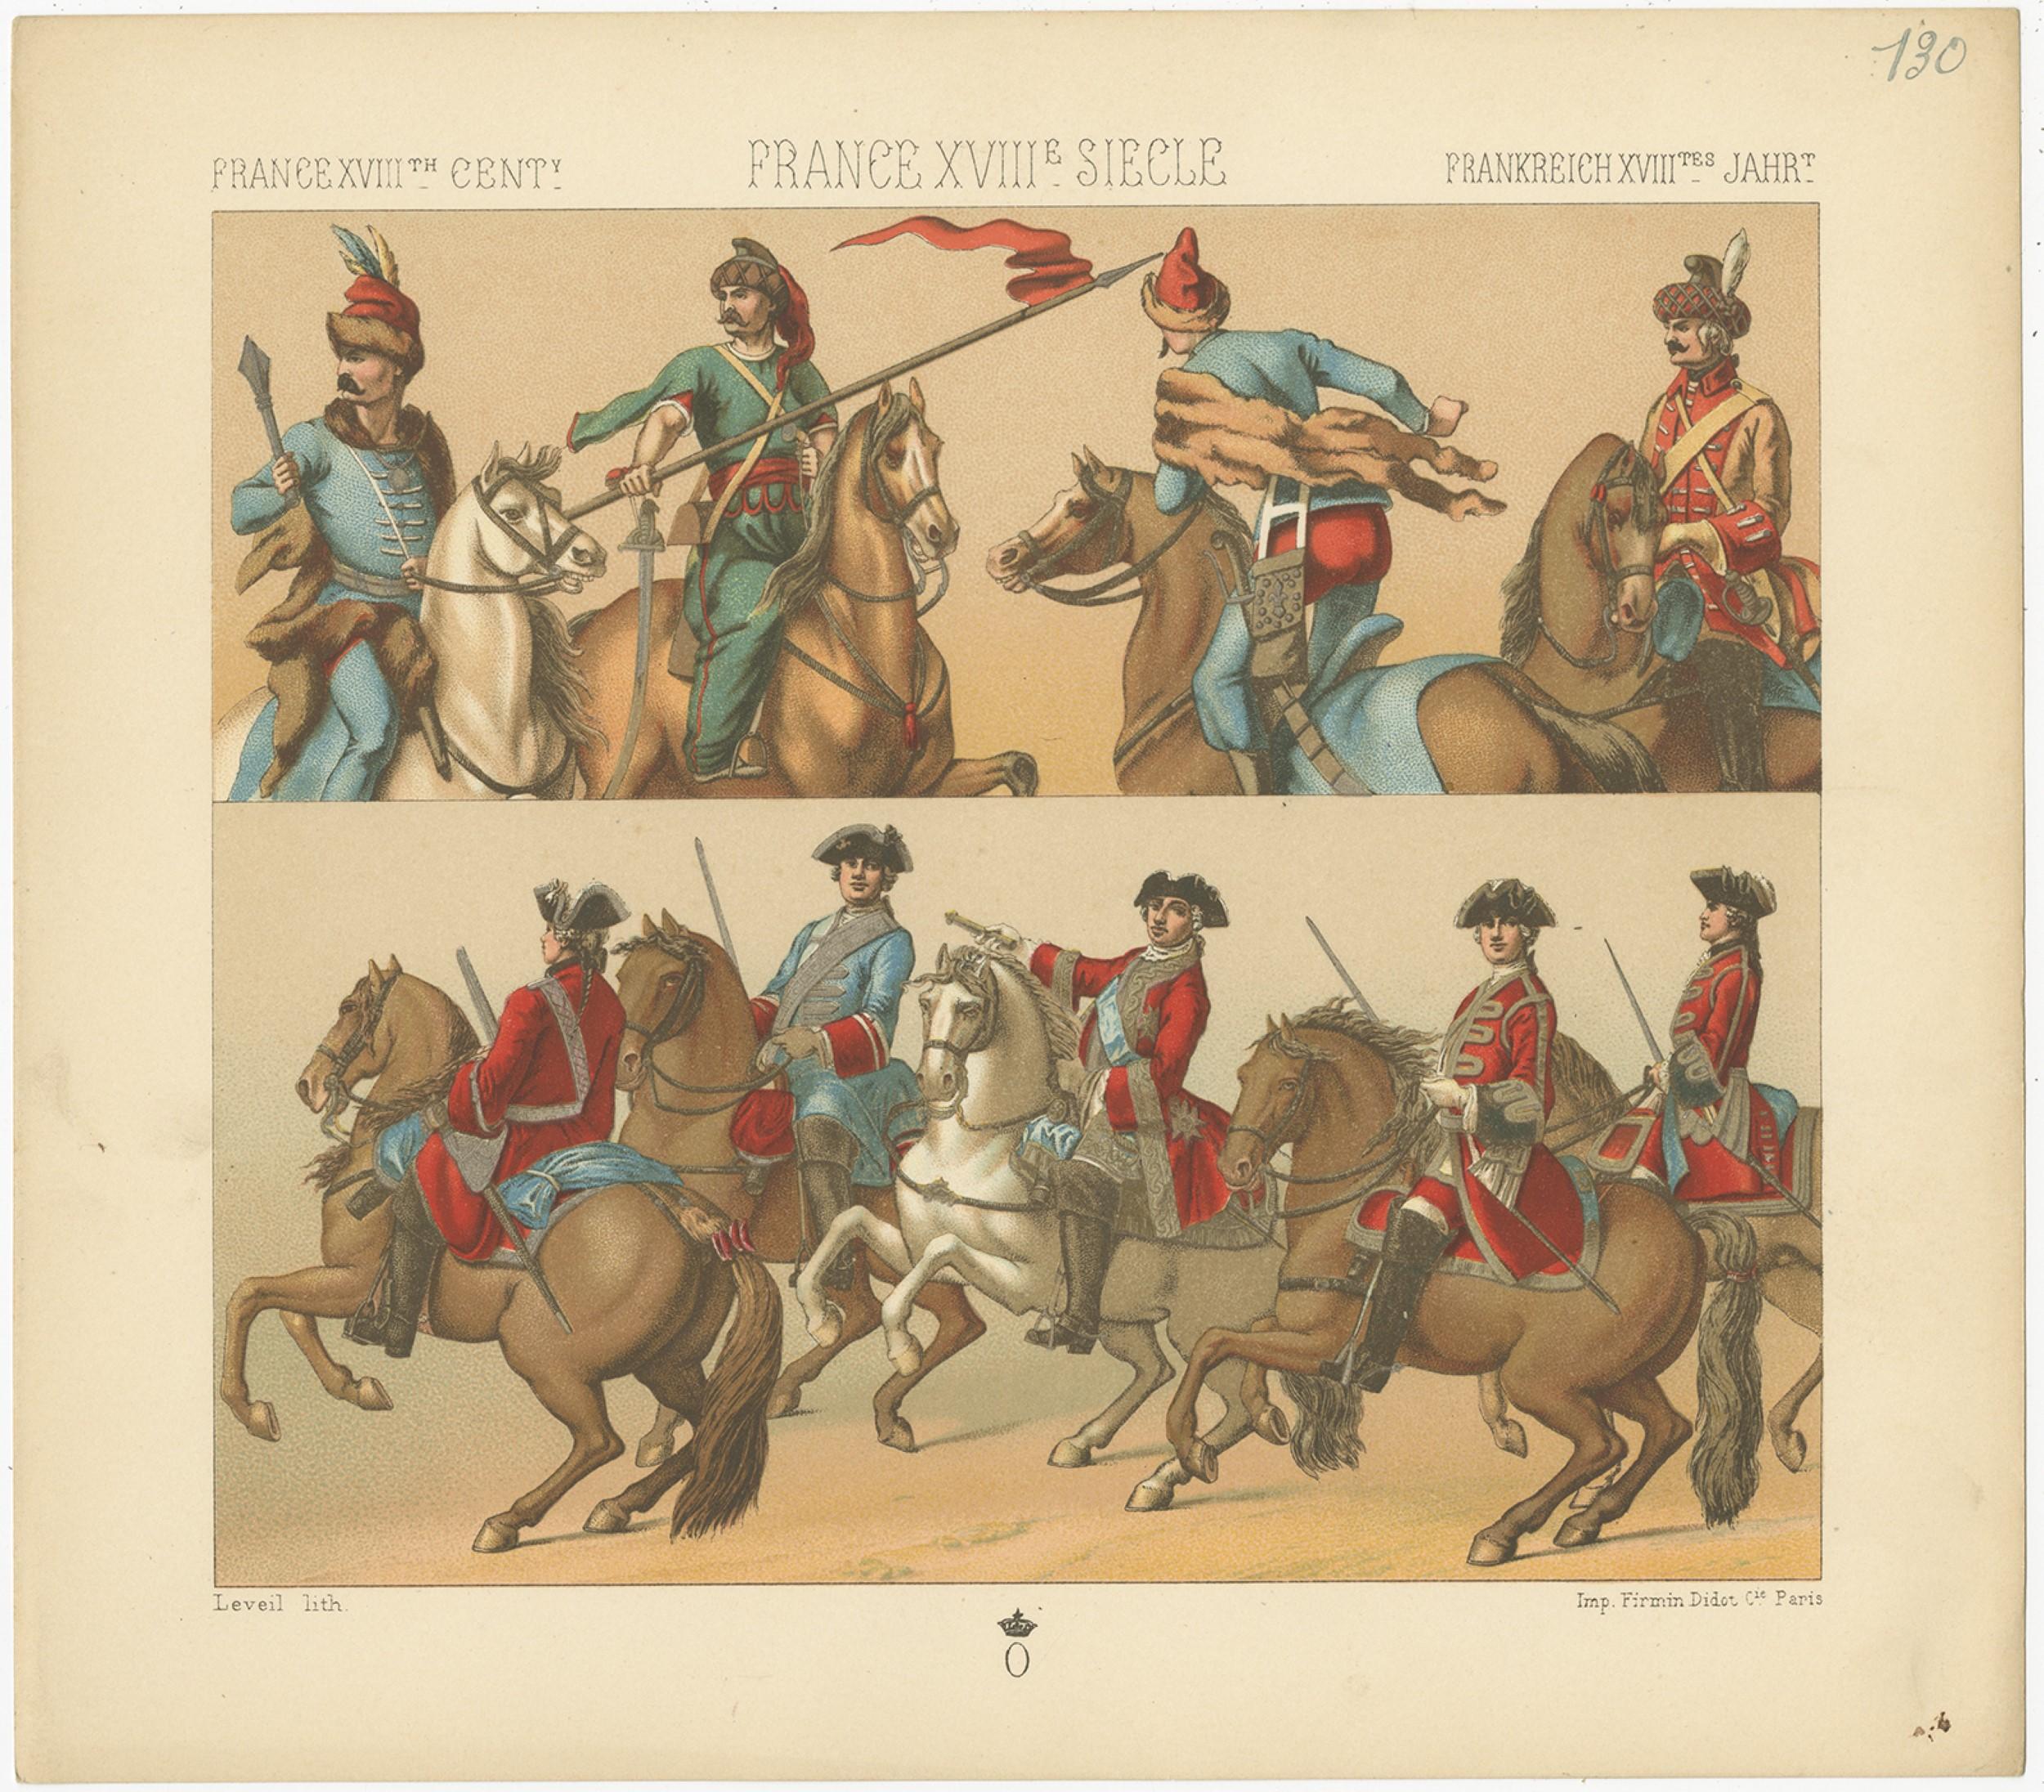 Antique print titled 'France XVIIIth Cent - France XVIIIe, Siecle - Frankreich XVIIItes Jahr'. Chromolithograph of French 18th century military outfits. This print originates from 'Le Costume Historique' by M.A. Racinet. Published, circa 1880.
 
  